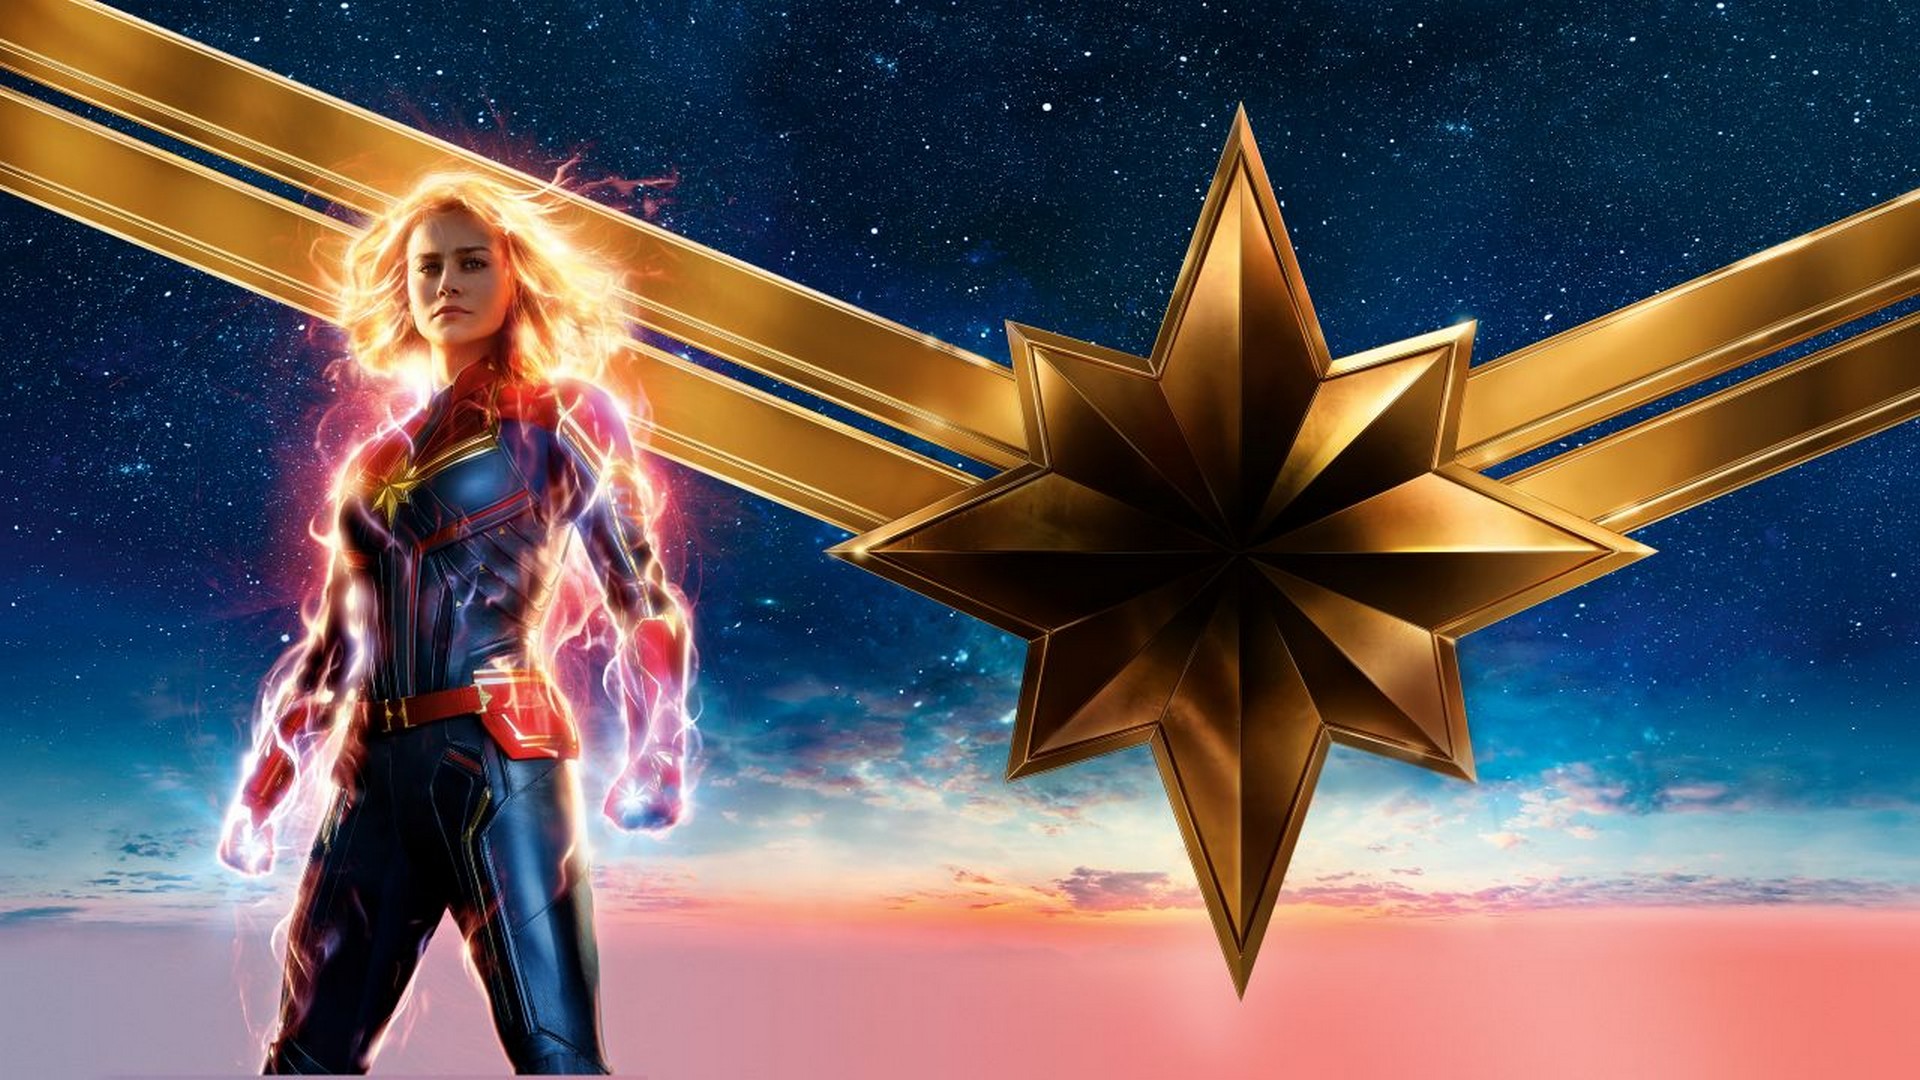 Captain Marvel 2019 Full Movie Wallpaper with high-resolution 1920x1080 pixel. You can use this poster wallpaper for your Desktop Computers, Mac Screensavers, Windows Backgrounds, iPhone Wallpapers, Tablet or Android Lock screen and another Mobile device